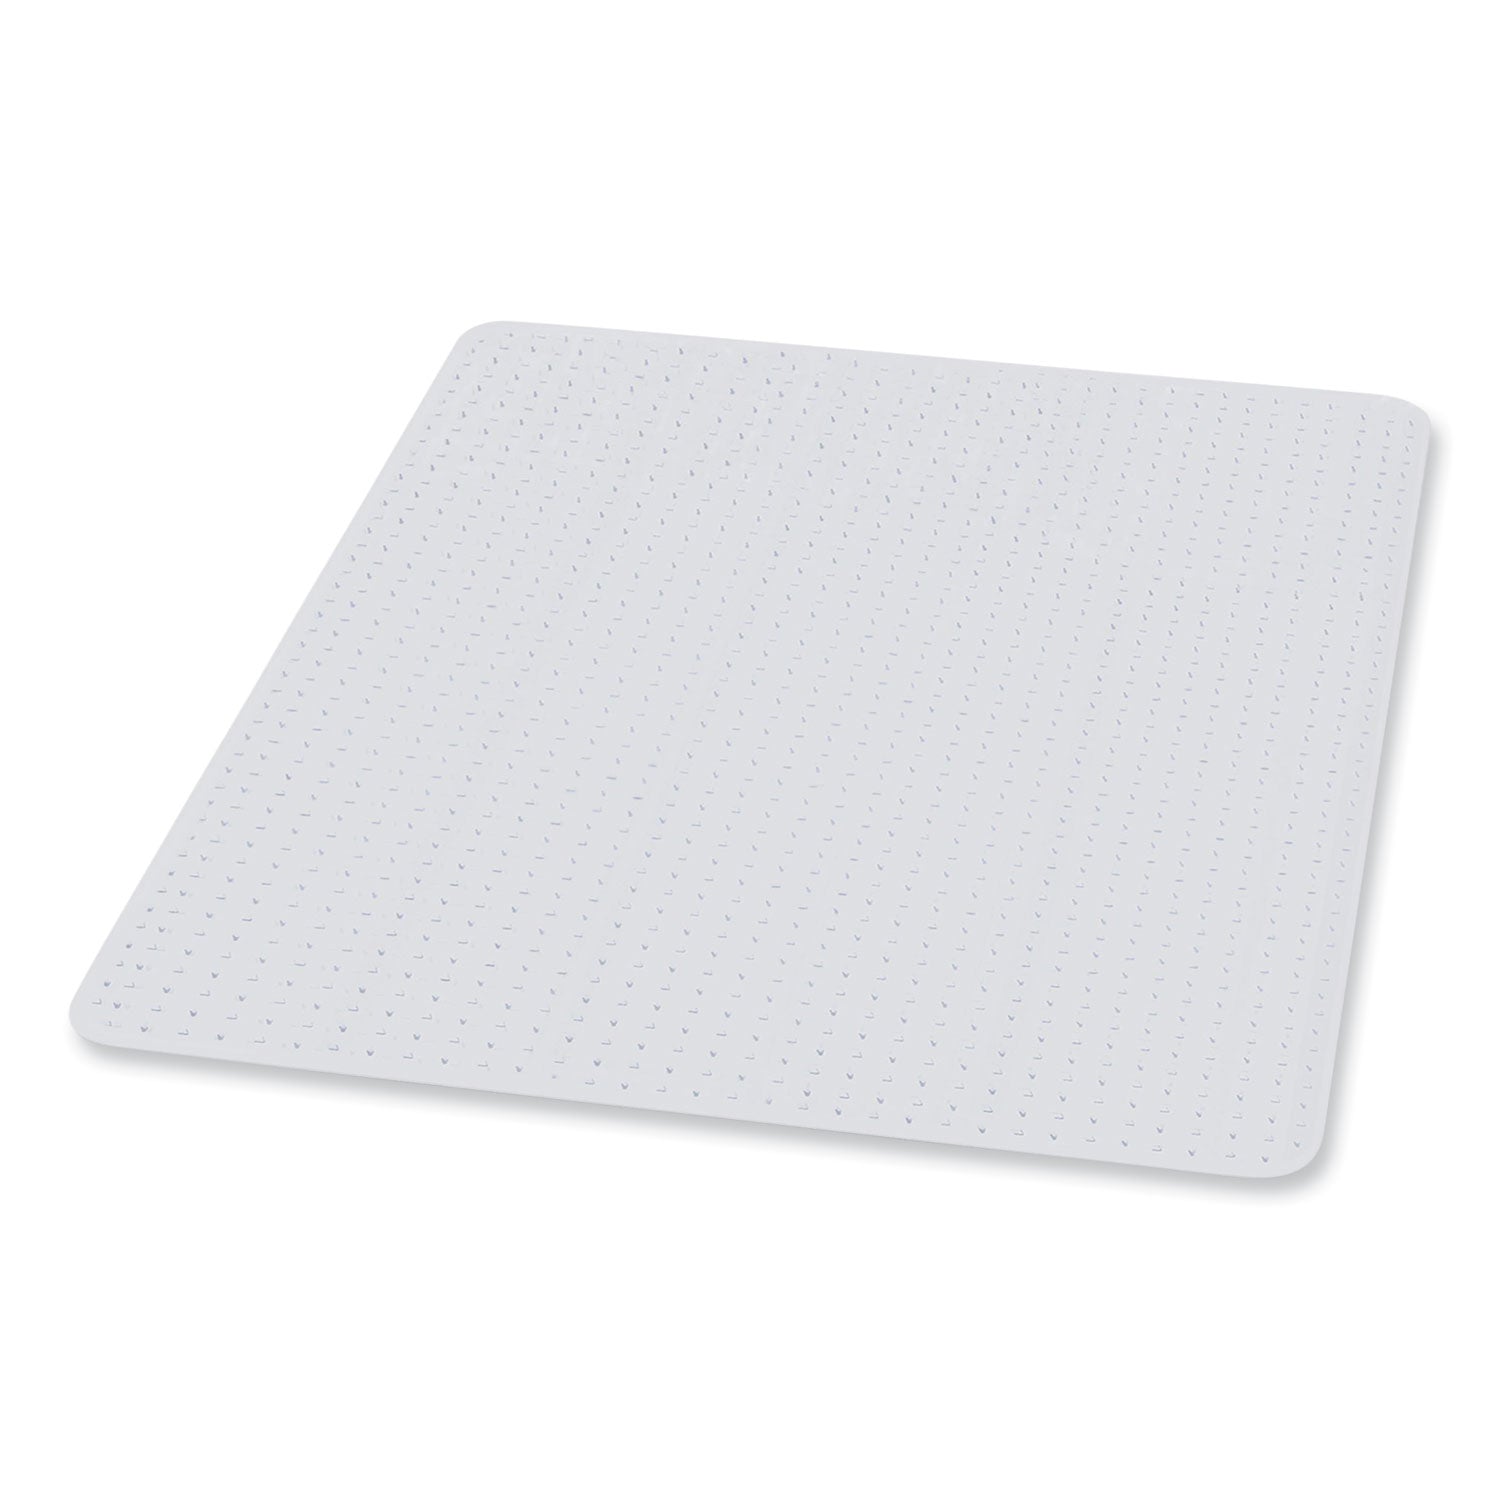 everlife-chair-mat-for-extra-high-pile-carpet-square-60-x-60-clear-ships-in-4-6-business-days_esr124681 - 1